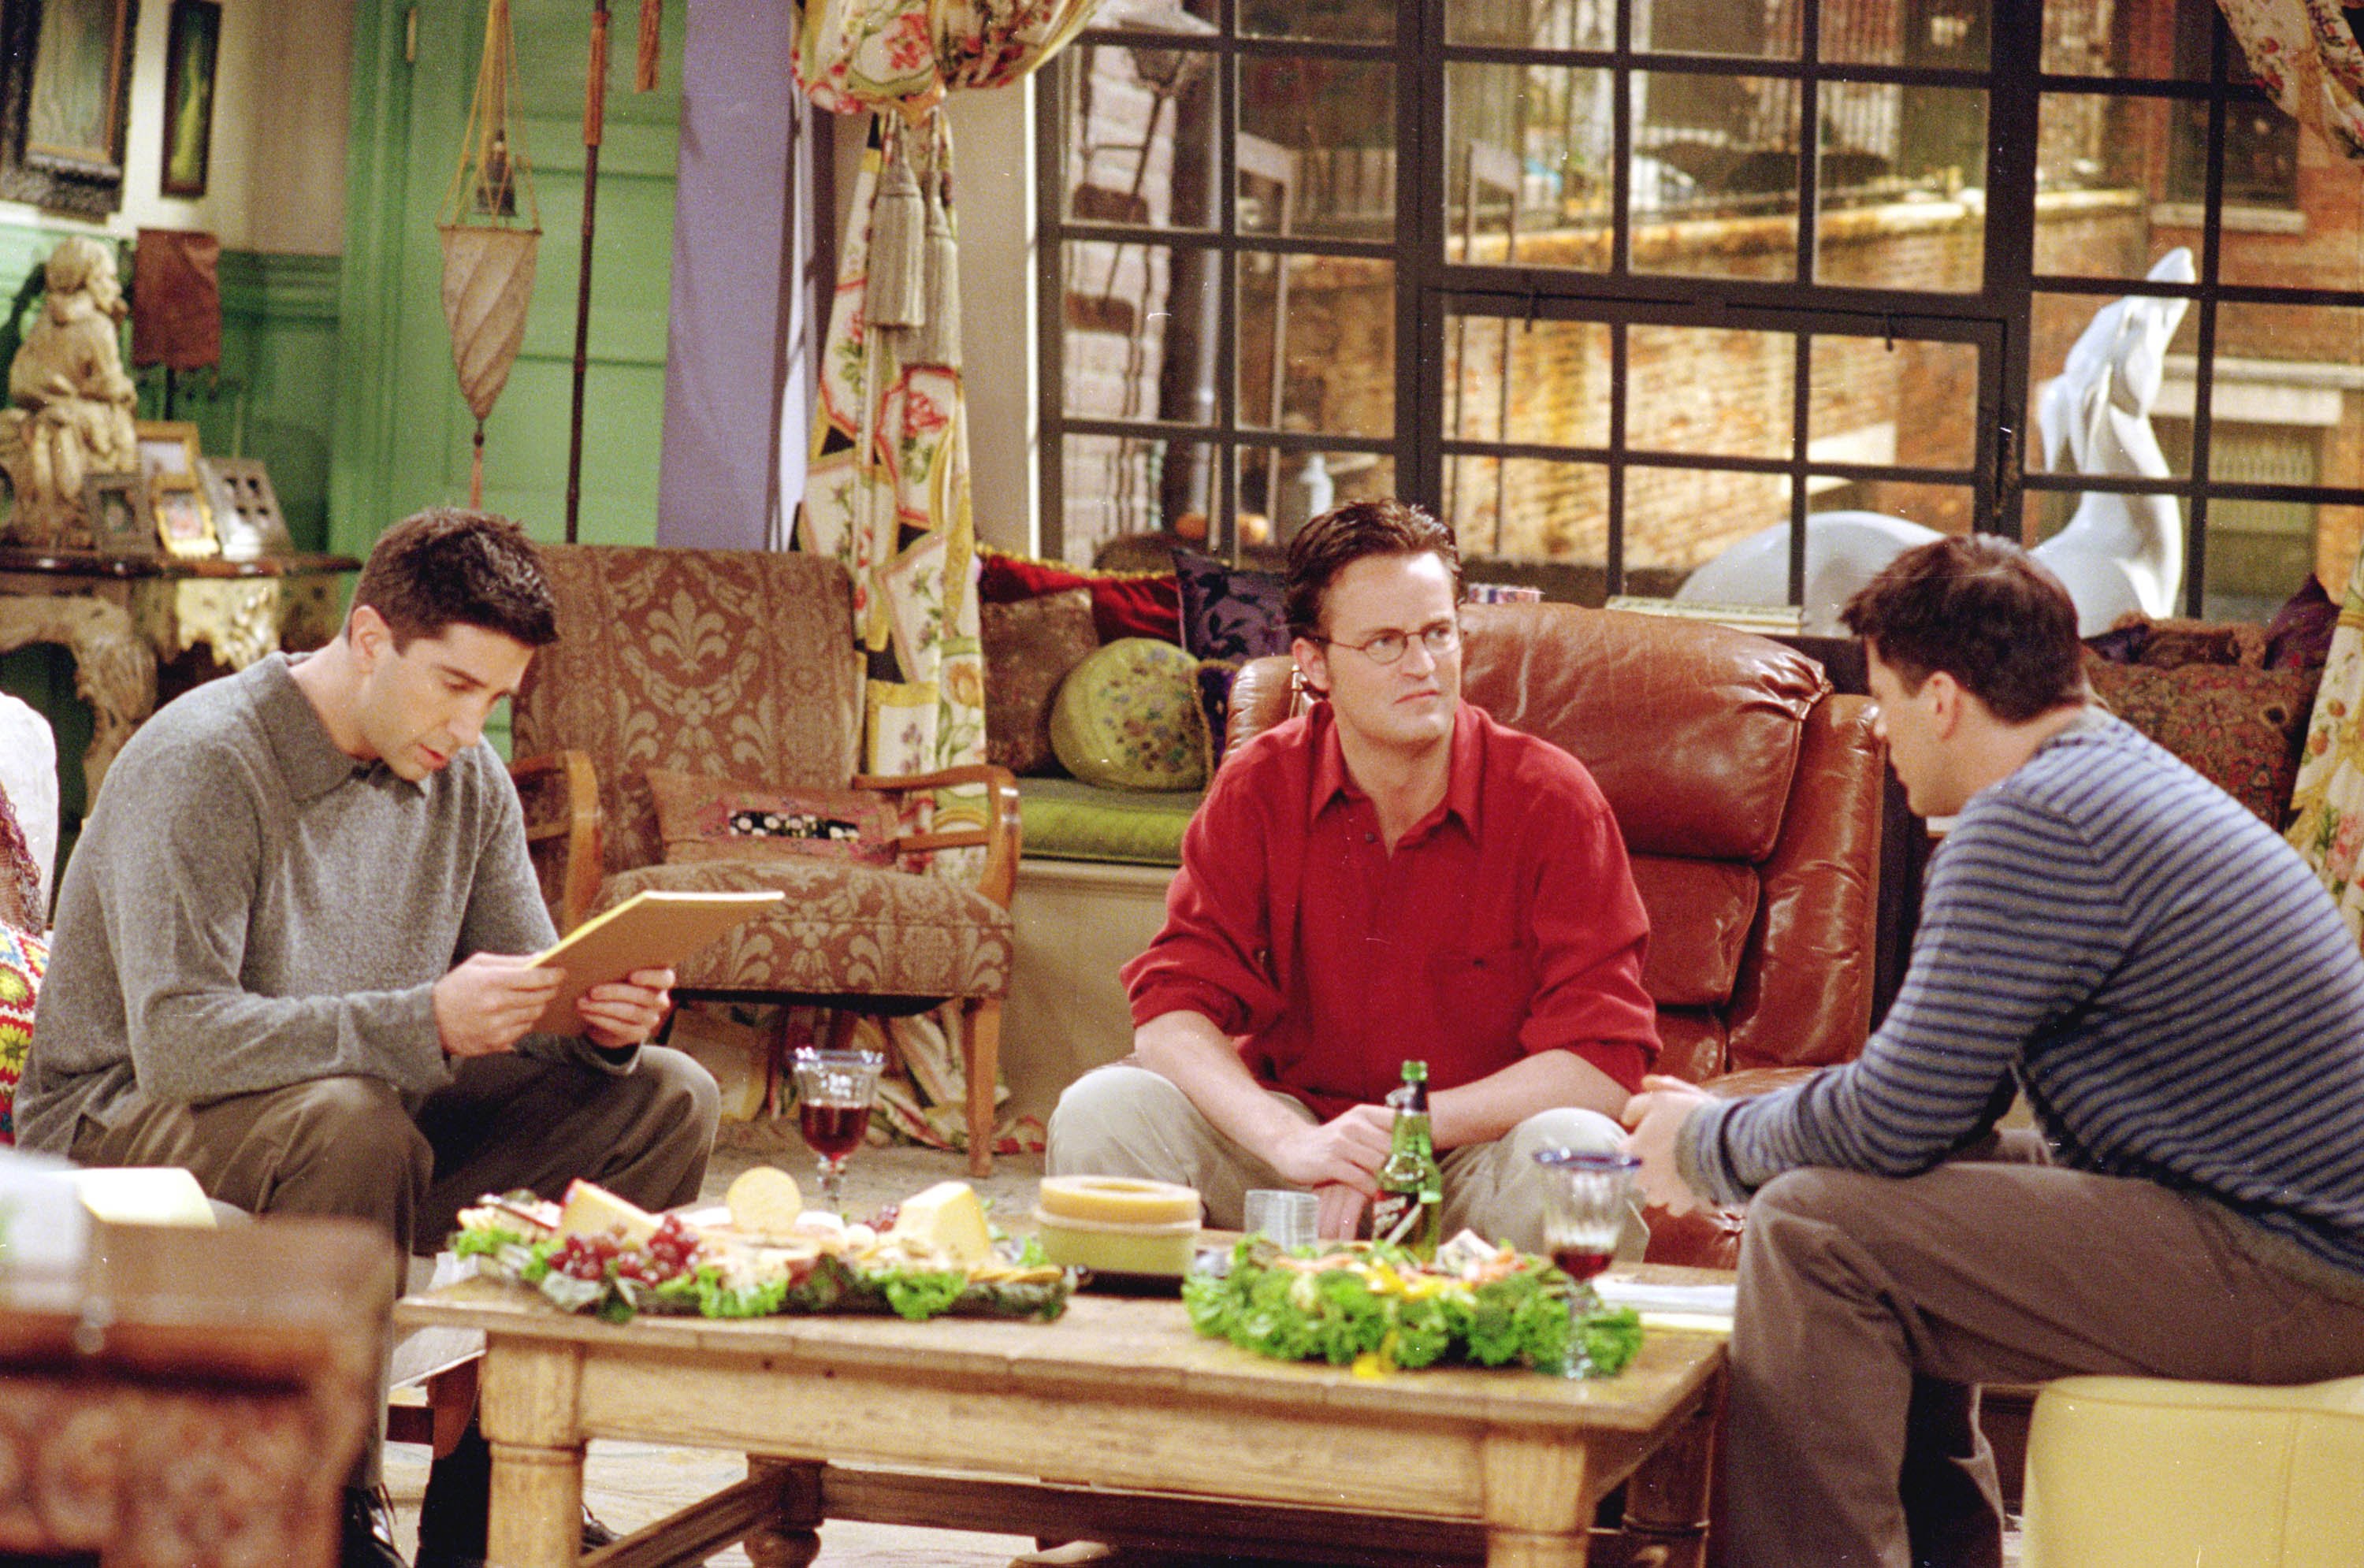 Ross Geller, Chandler Bing and Joey Tribbiani chat while sitting in the living room of Monica's apartment during a scene in 'Friends'